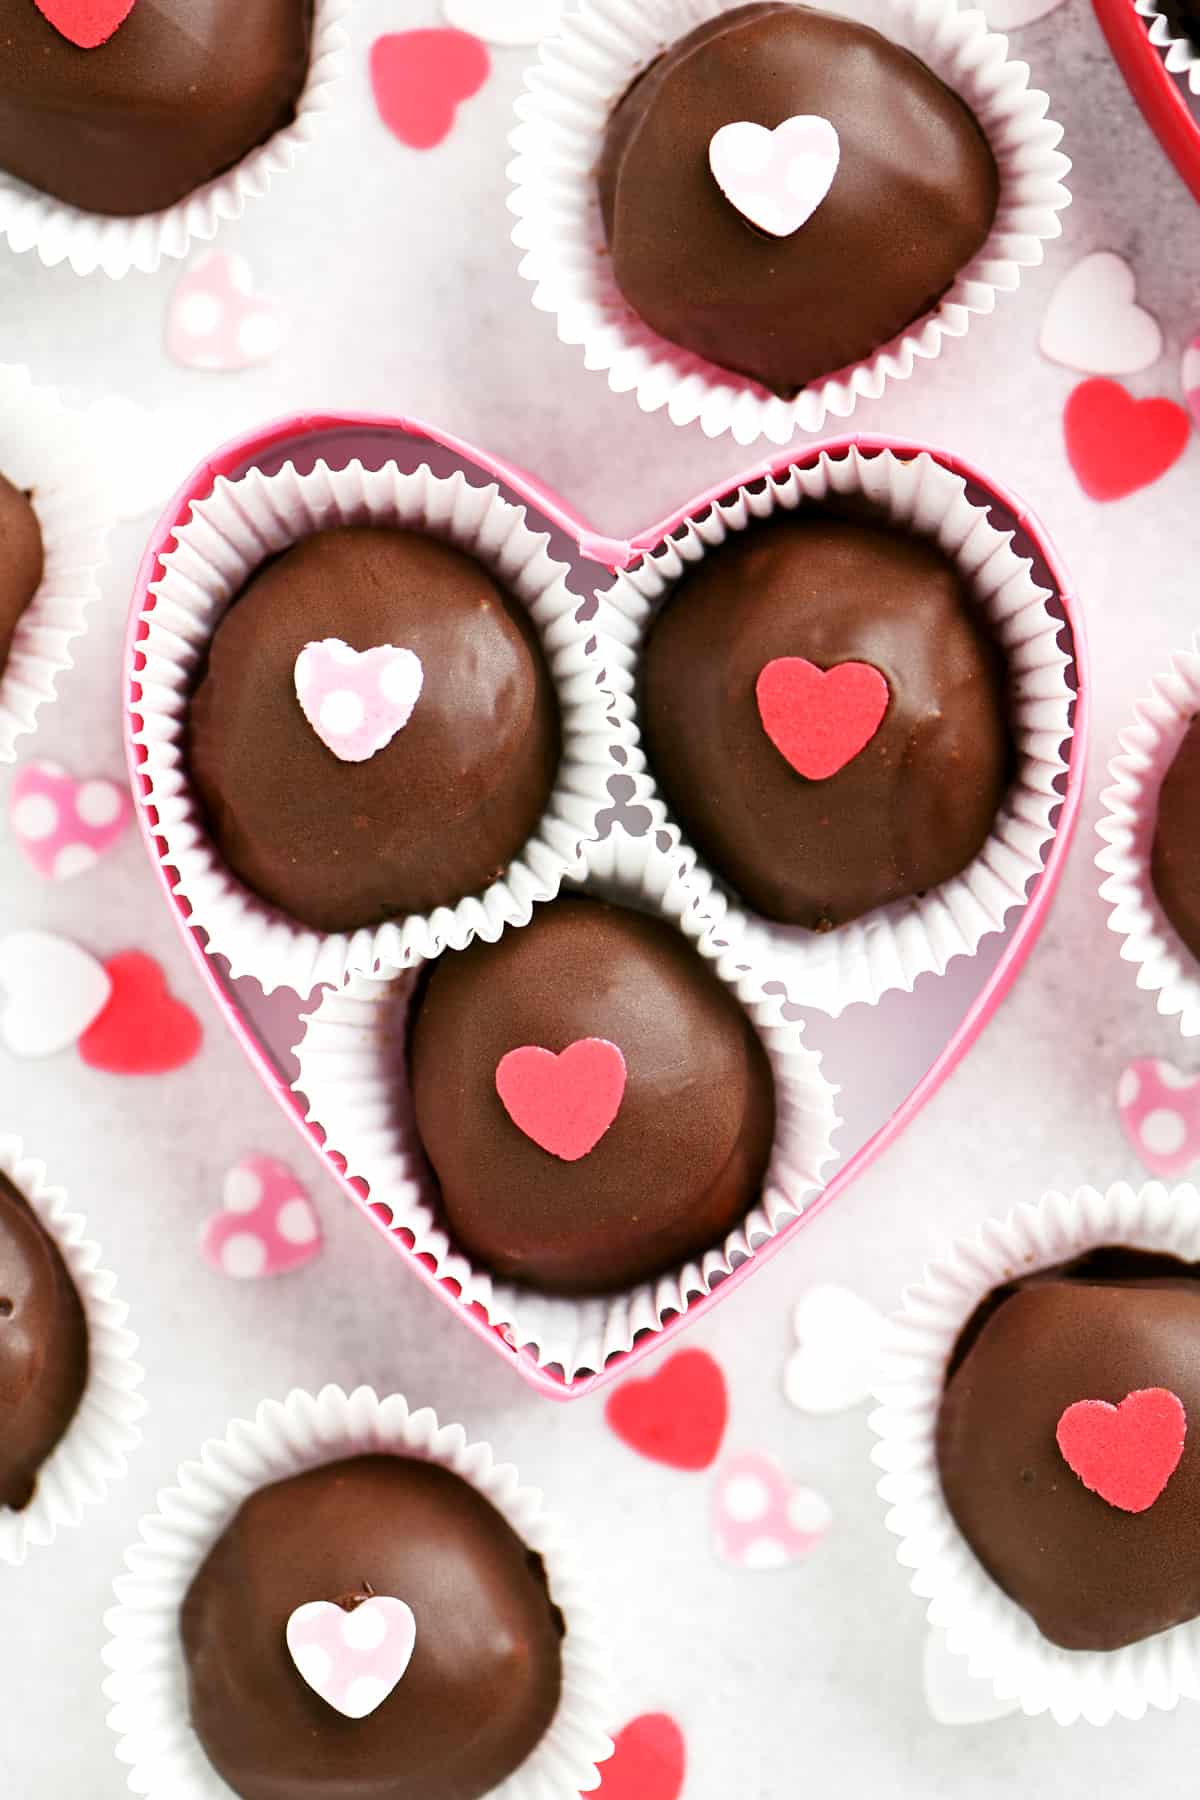 chocolate truffles in a heart shaped pink box surrounded by other truffles in paper cups